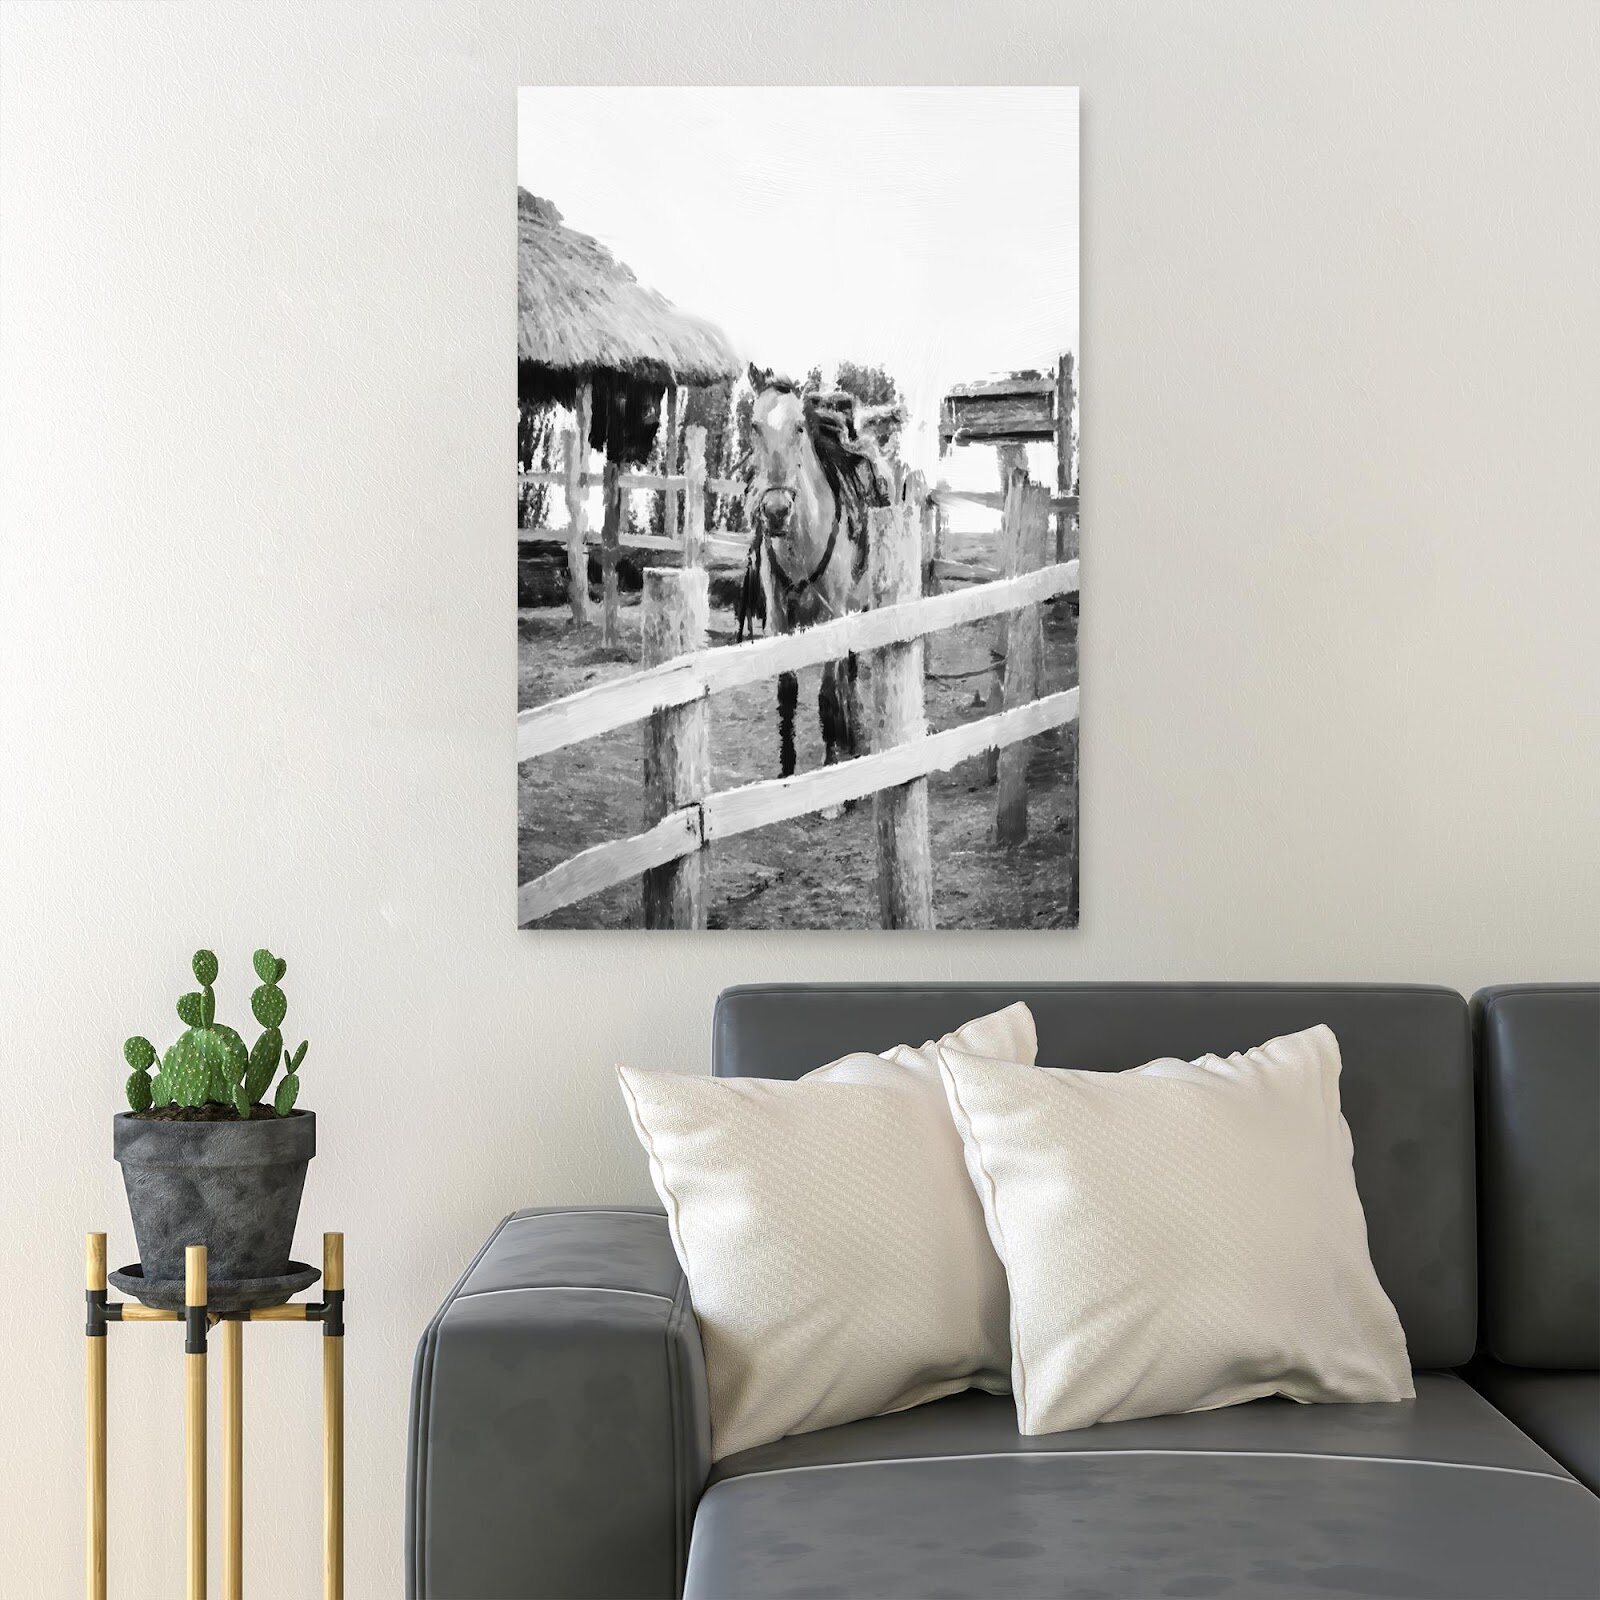 Grayscale Photo Of 2 Horses On Wooden Fence On Canvas Painting